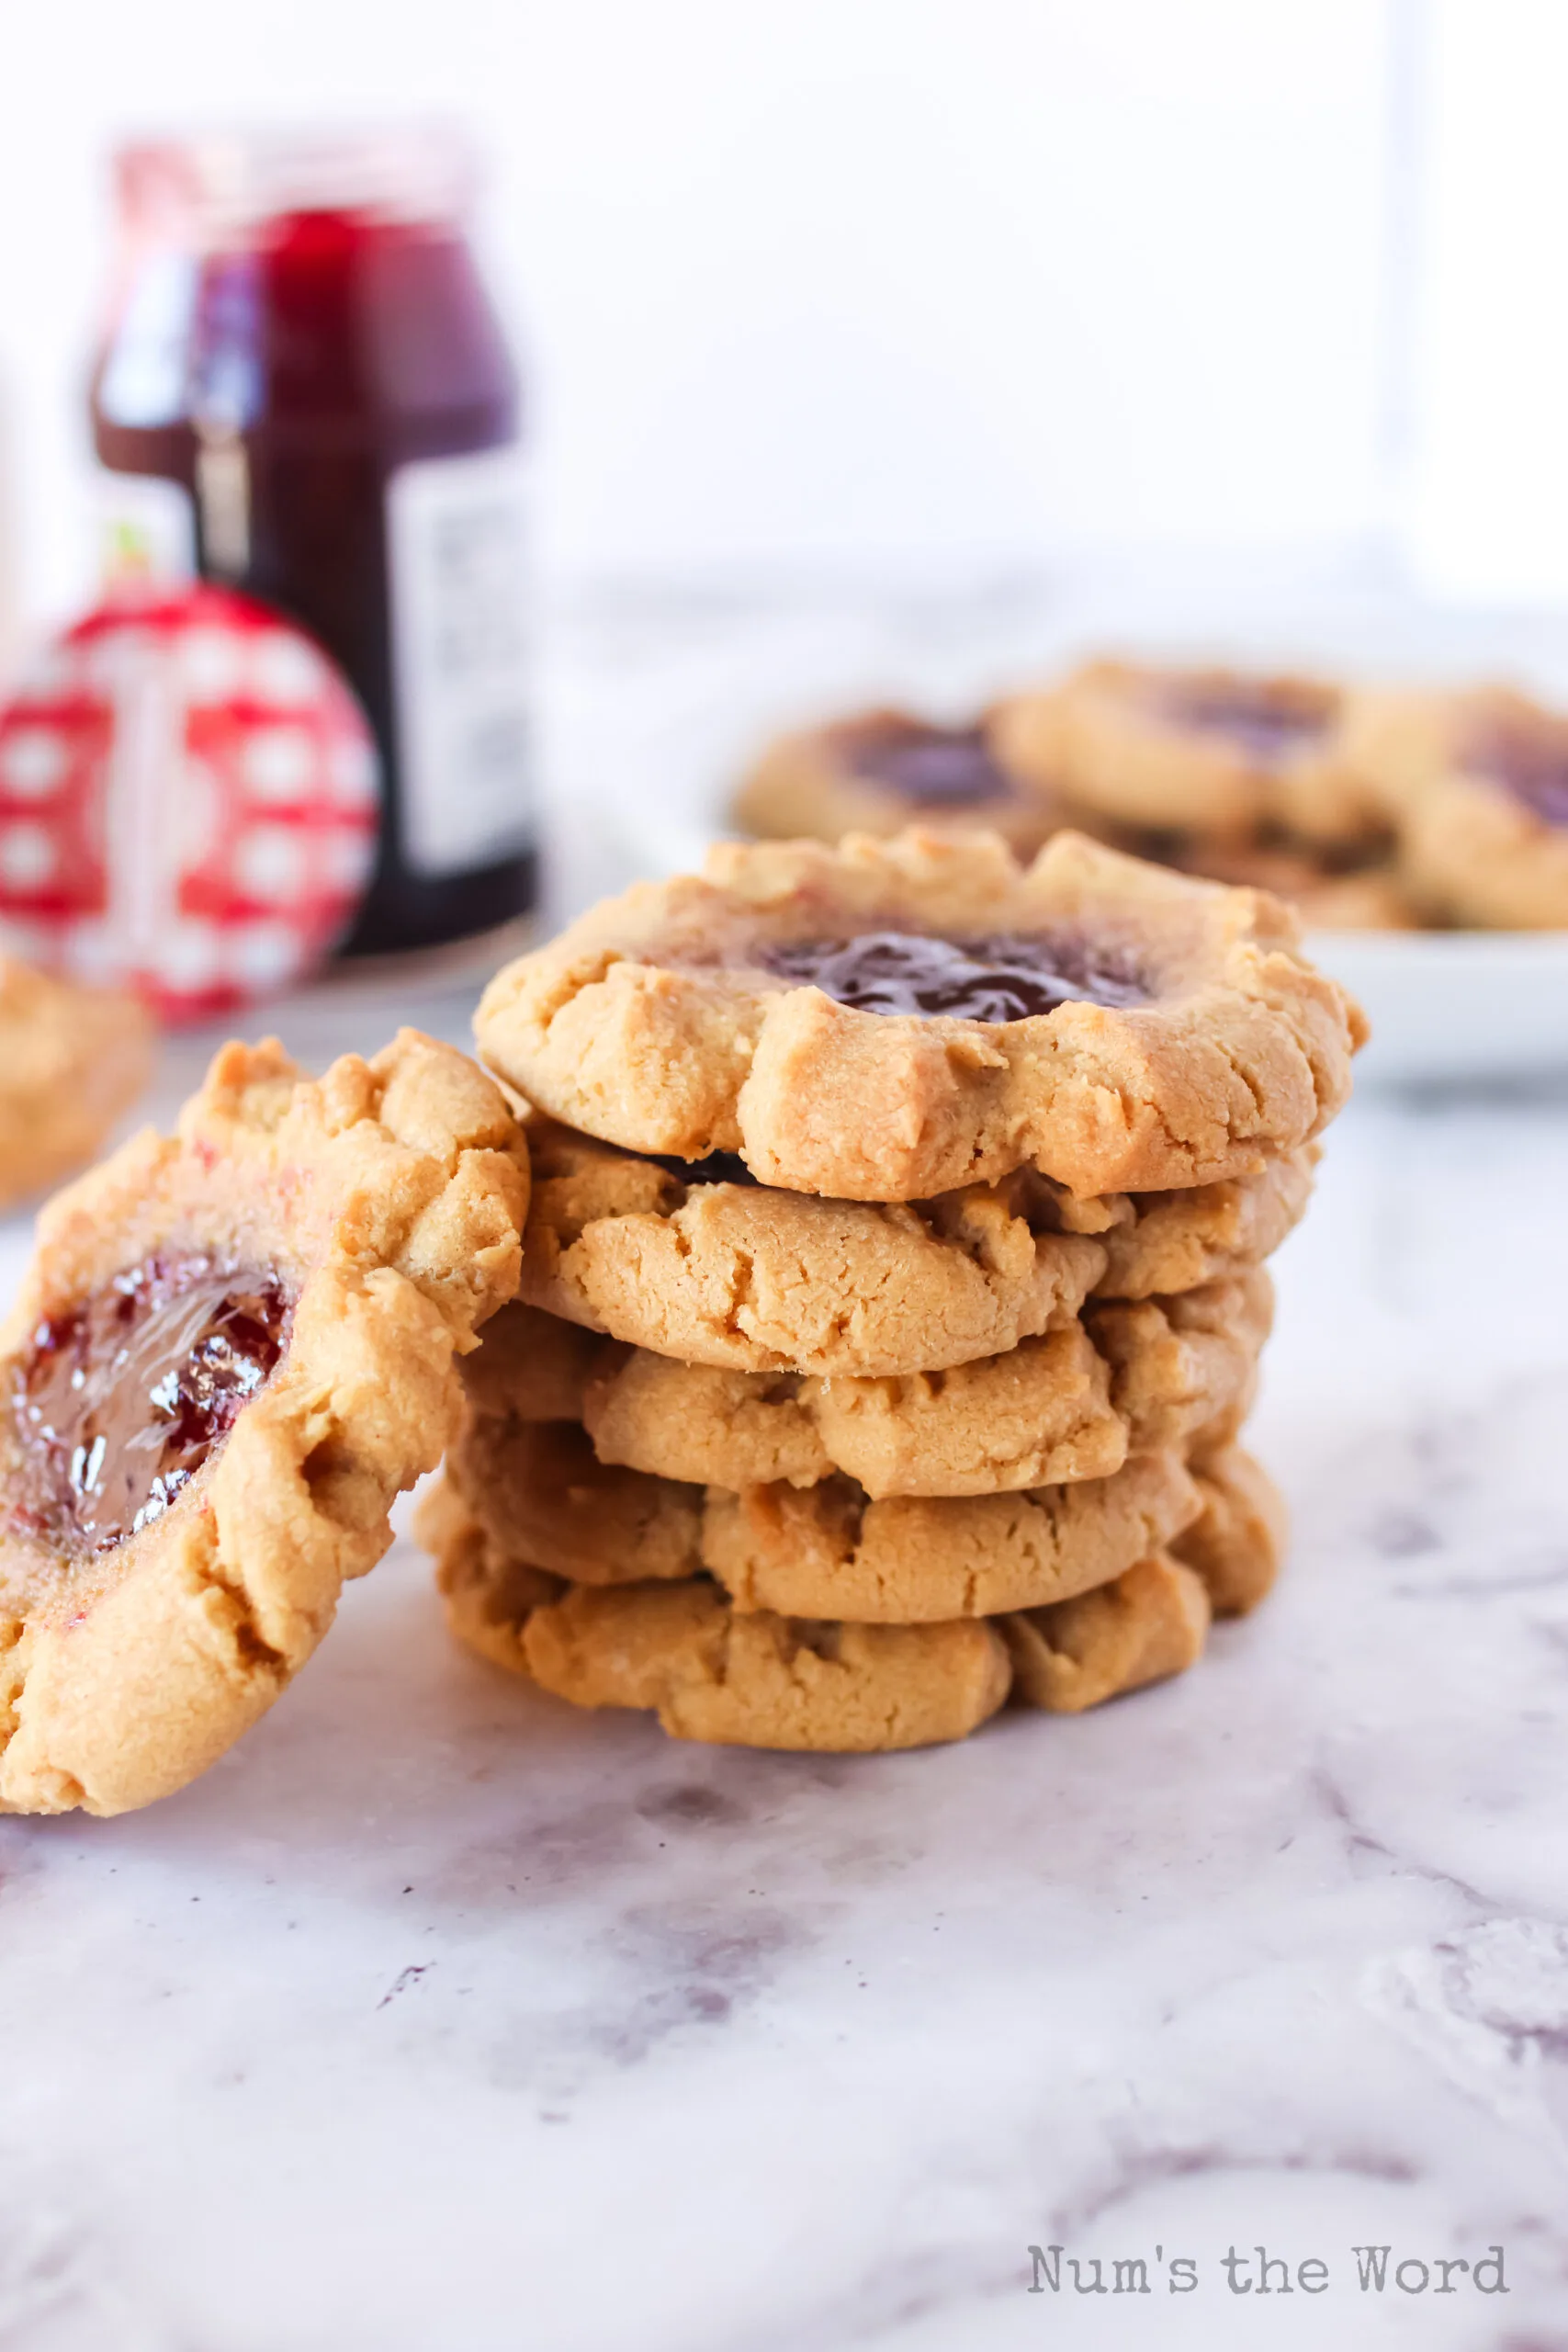 5 cookies stacked up on top of each other with 1 leaning against the pile.